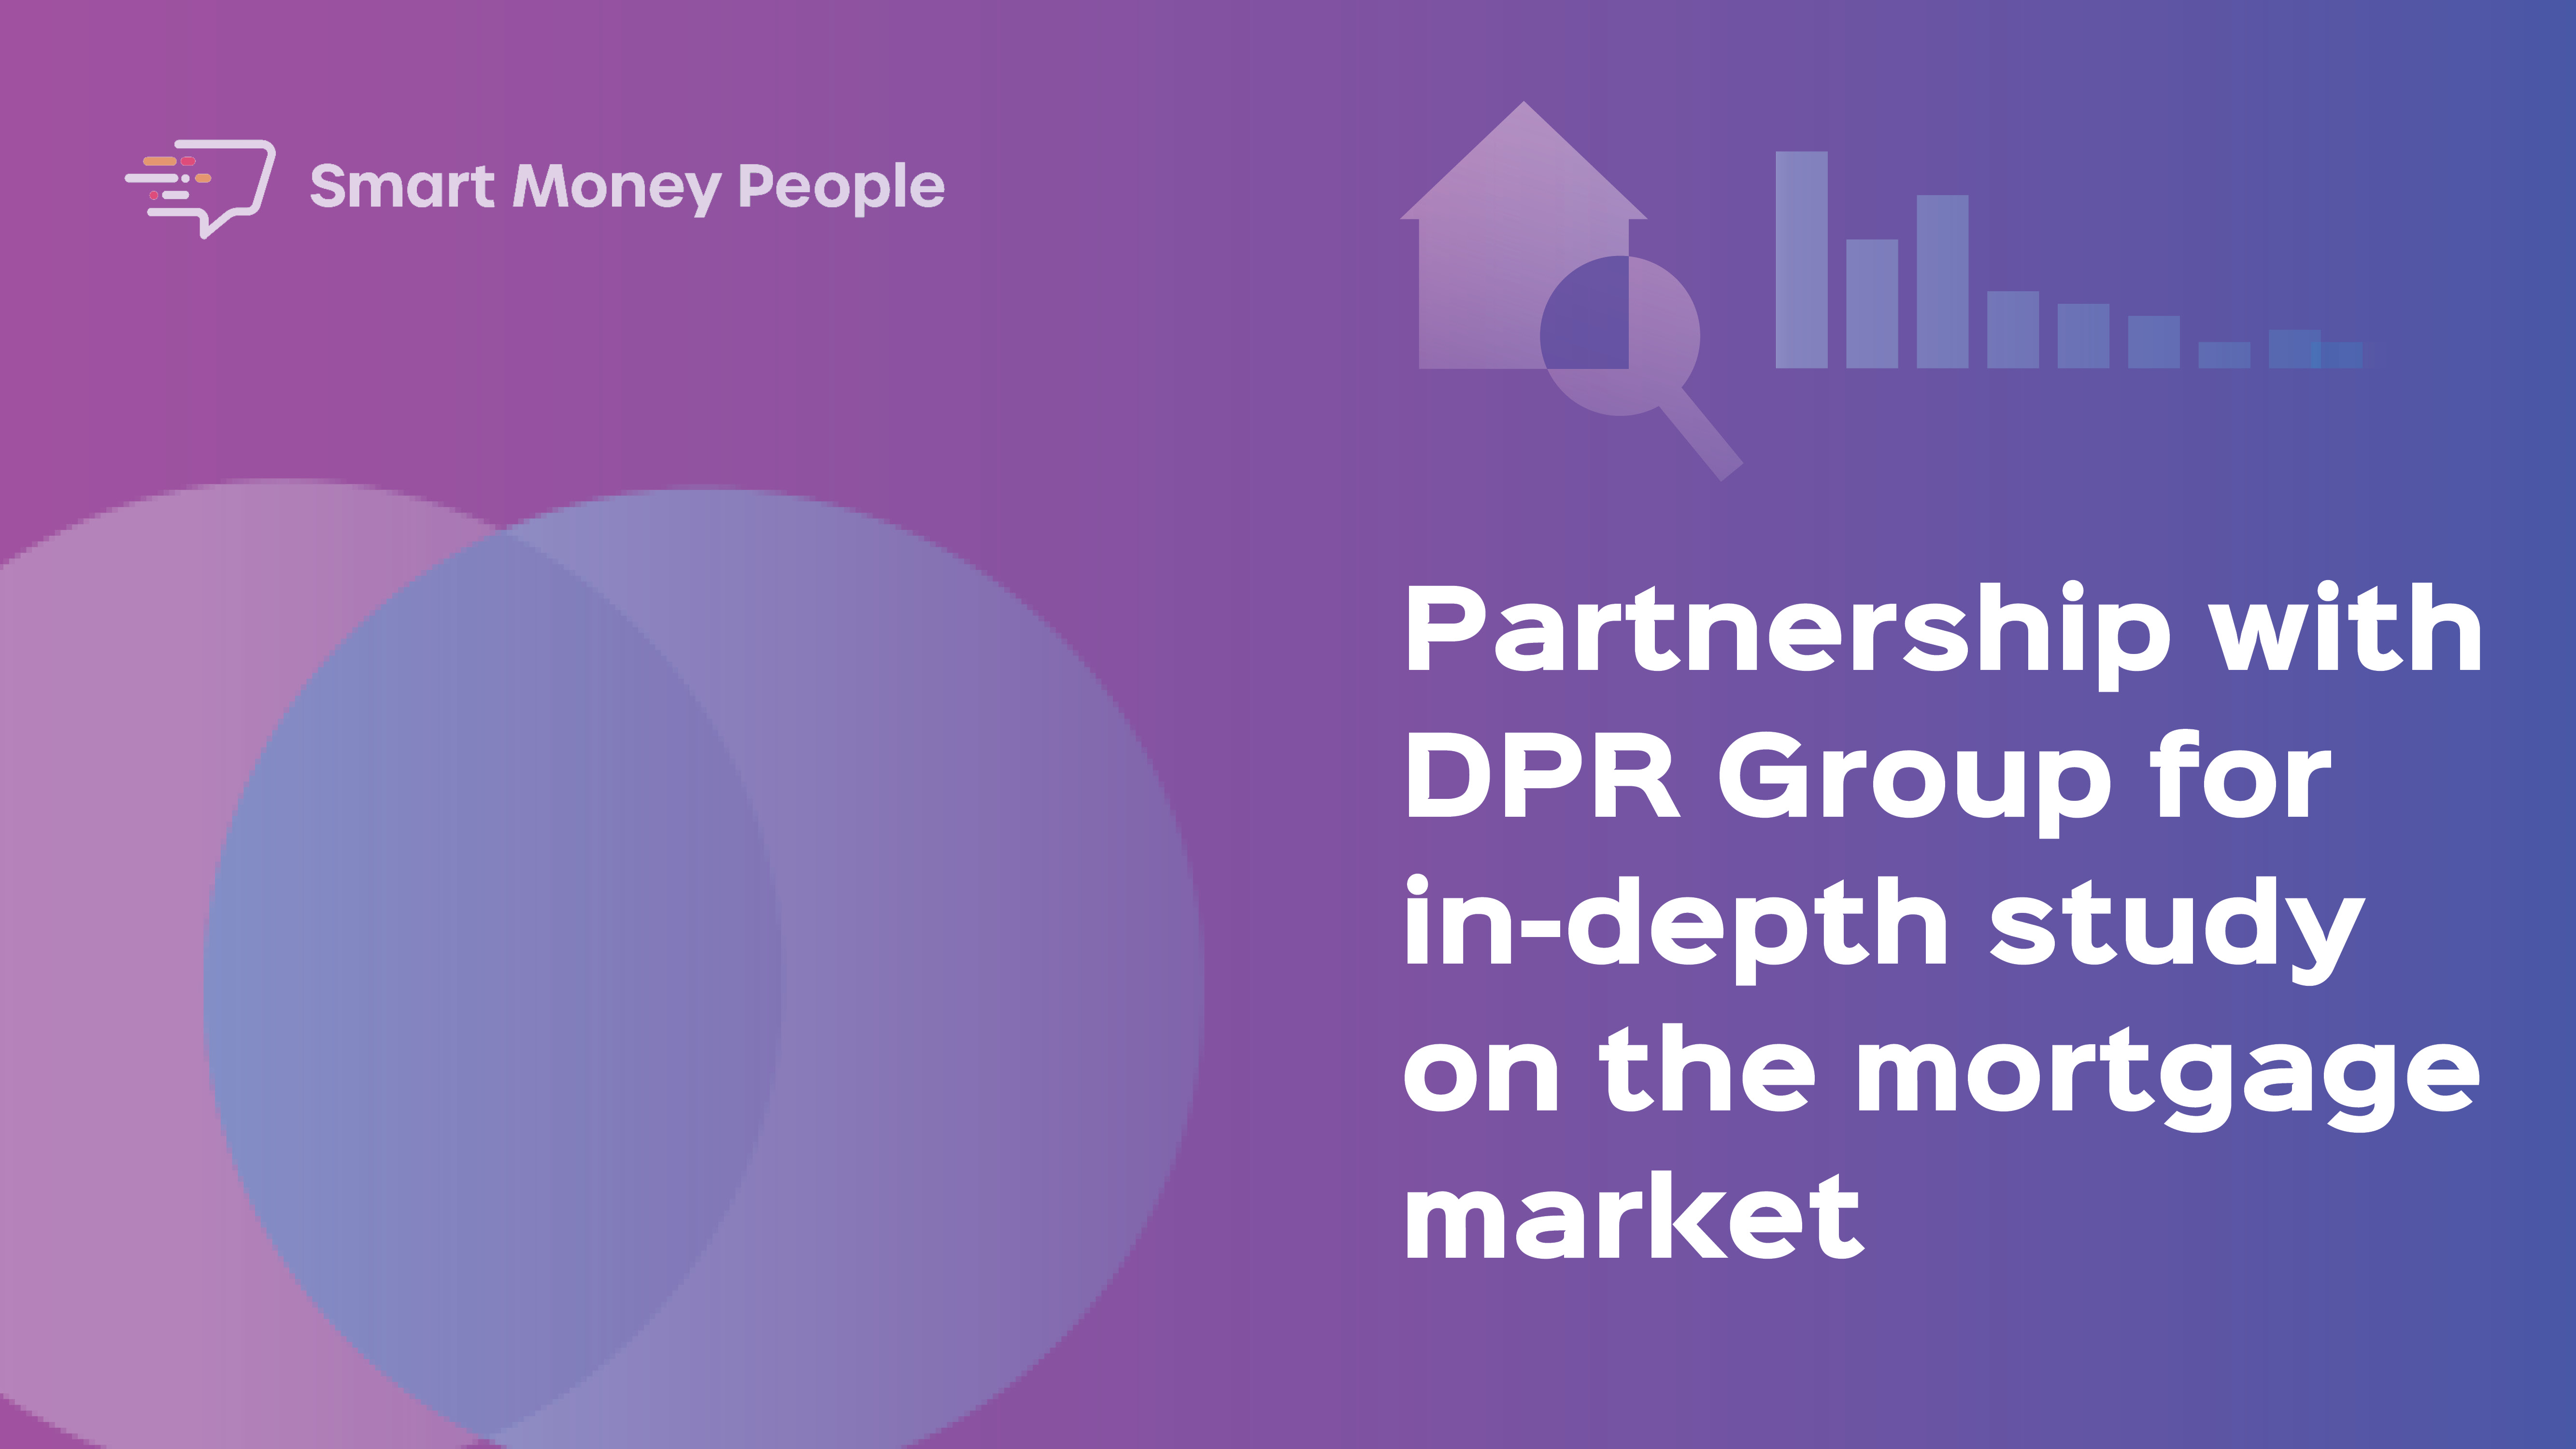 Smart Money People partners with DPR Group for in-depth study on the mortgage market